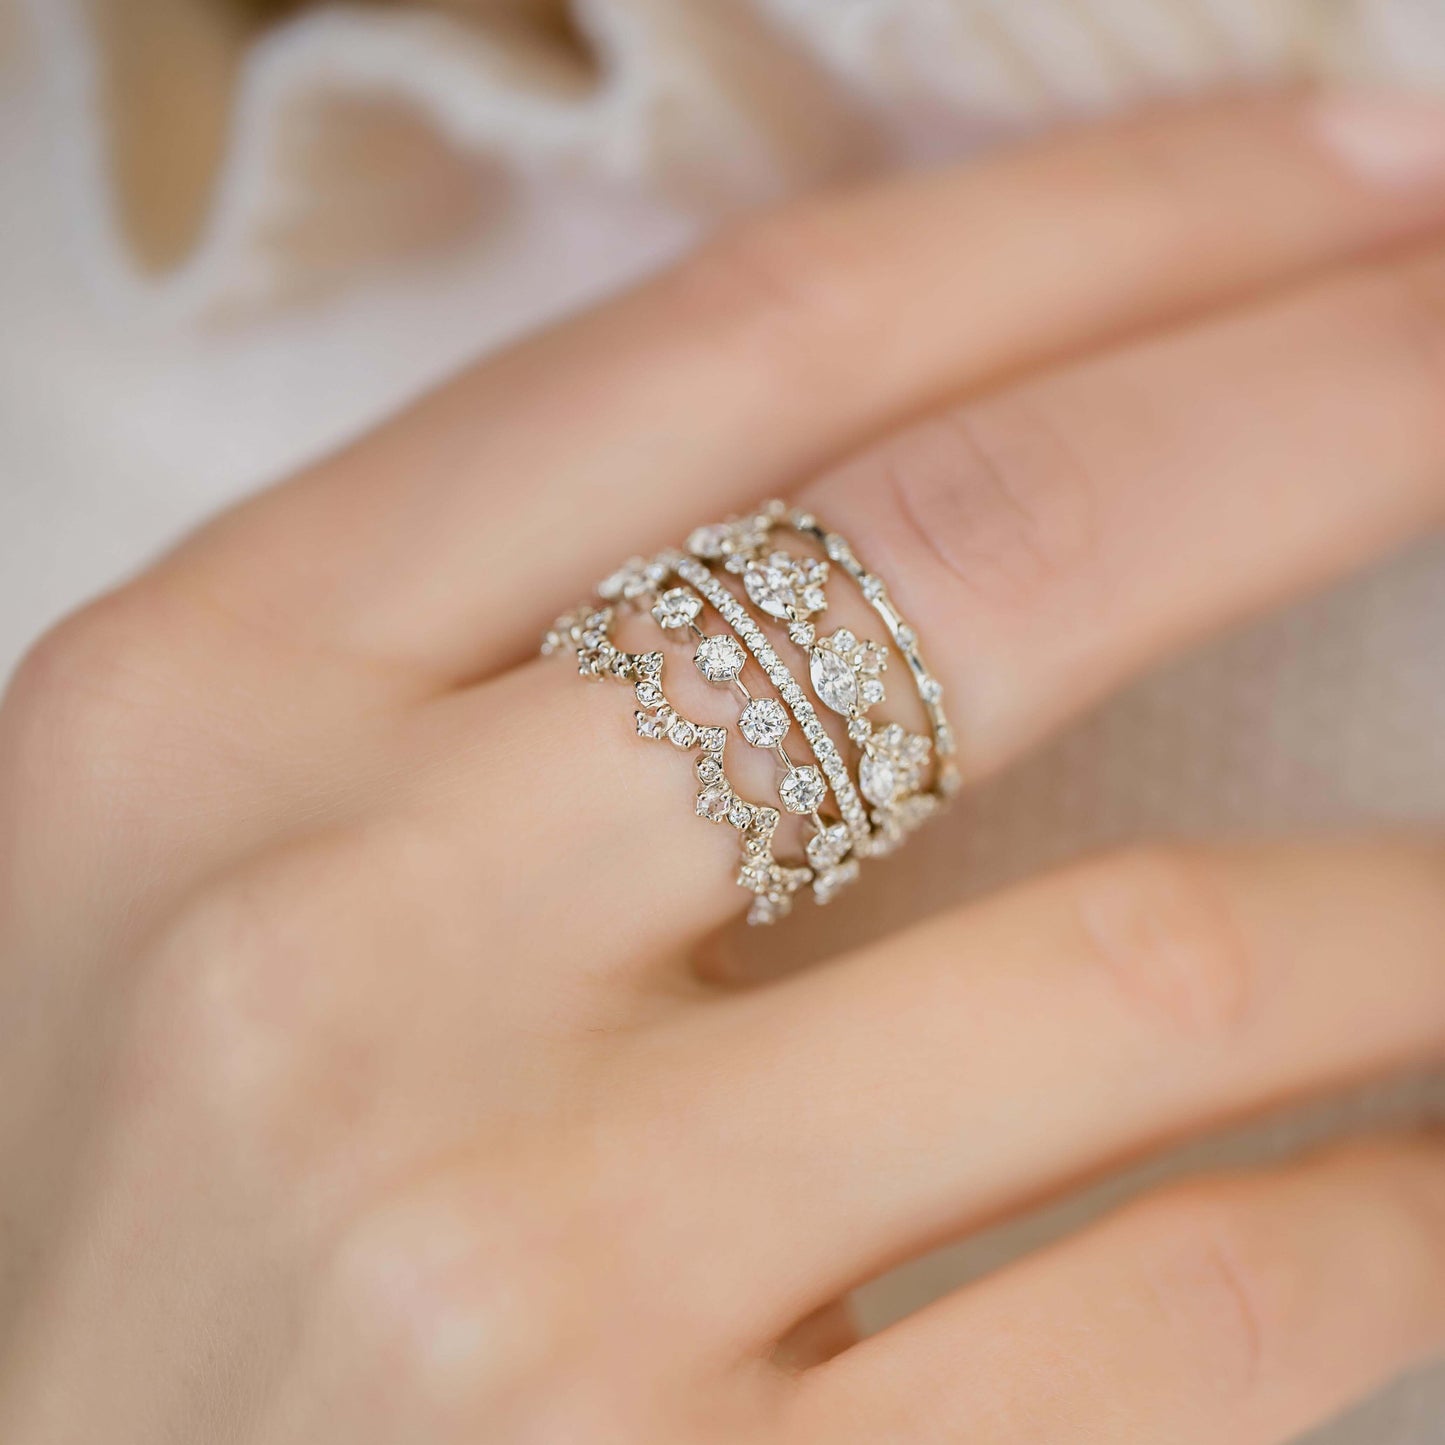 Lace Edge Ring - In Stock